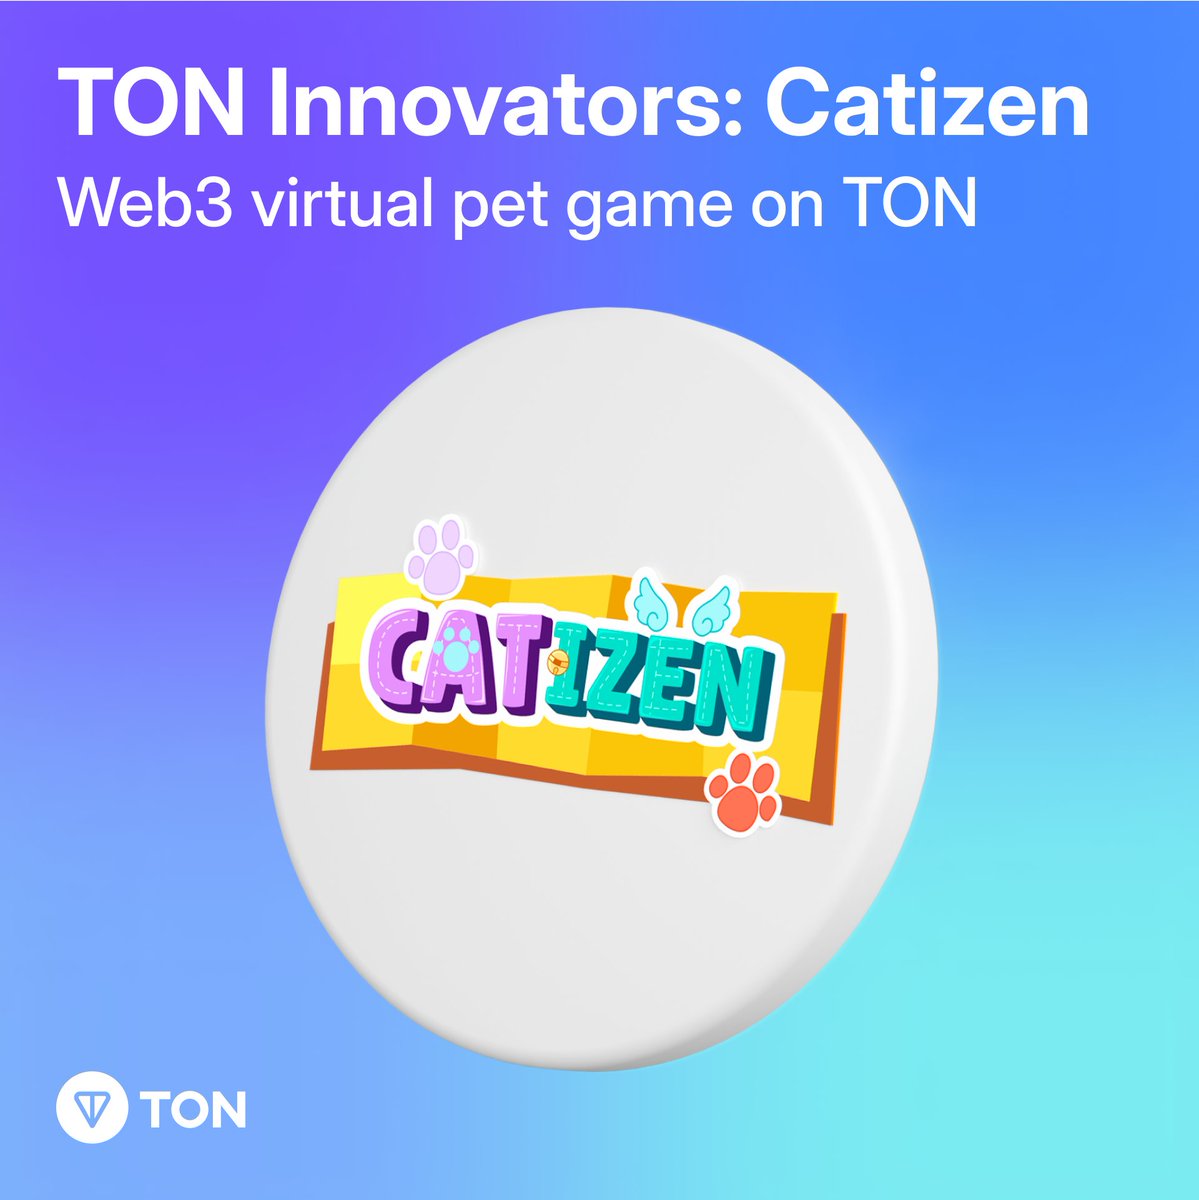 Introducing @CatizenAI 🐱 -The cutting-edge GameFi venture on #TON, revolutionizing user engagement with: 🔸Gaming for rewards 🎮💰 🔸Viral features 📈 🔸Seamless e-commerce tie-ins 🛍️ Join over 5M cat enthusiasts already on board,with thousands more joining daily! 🚀